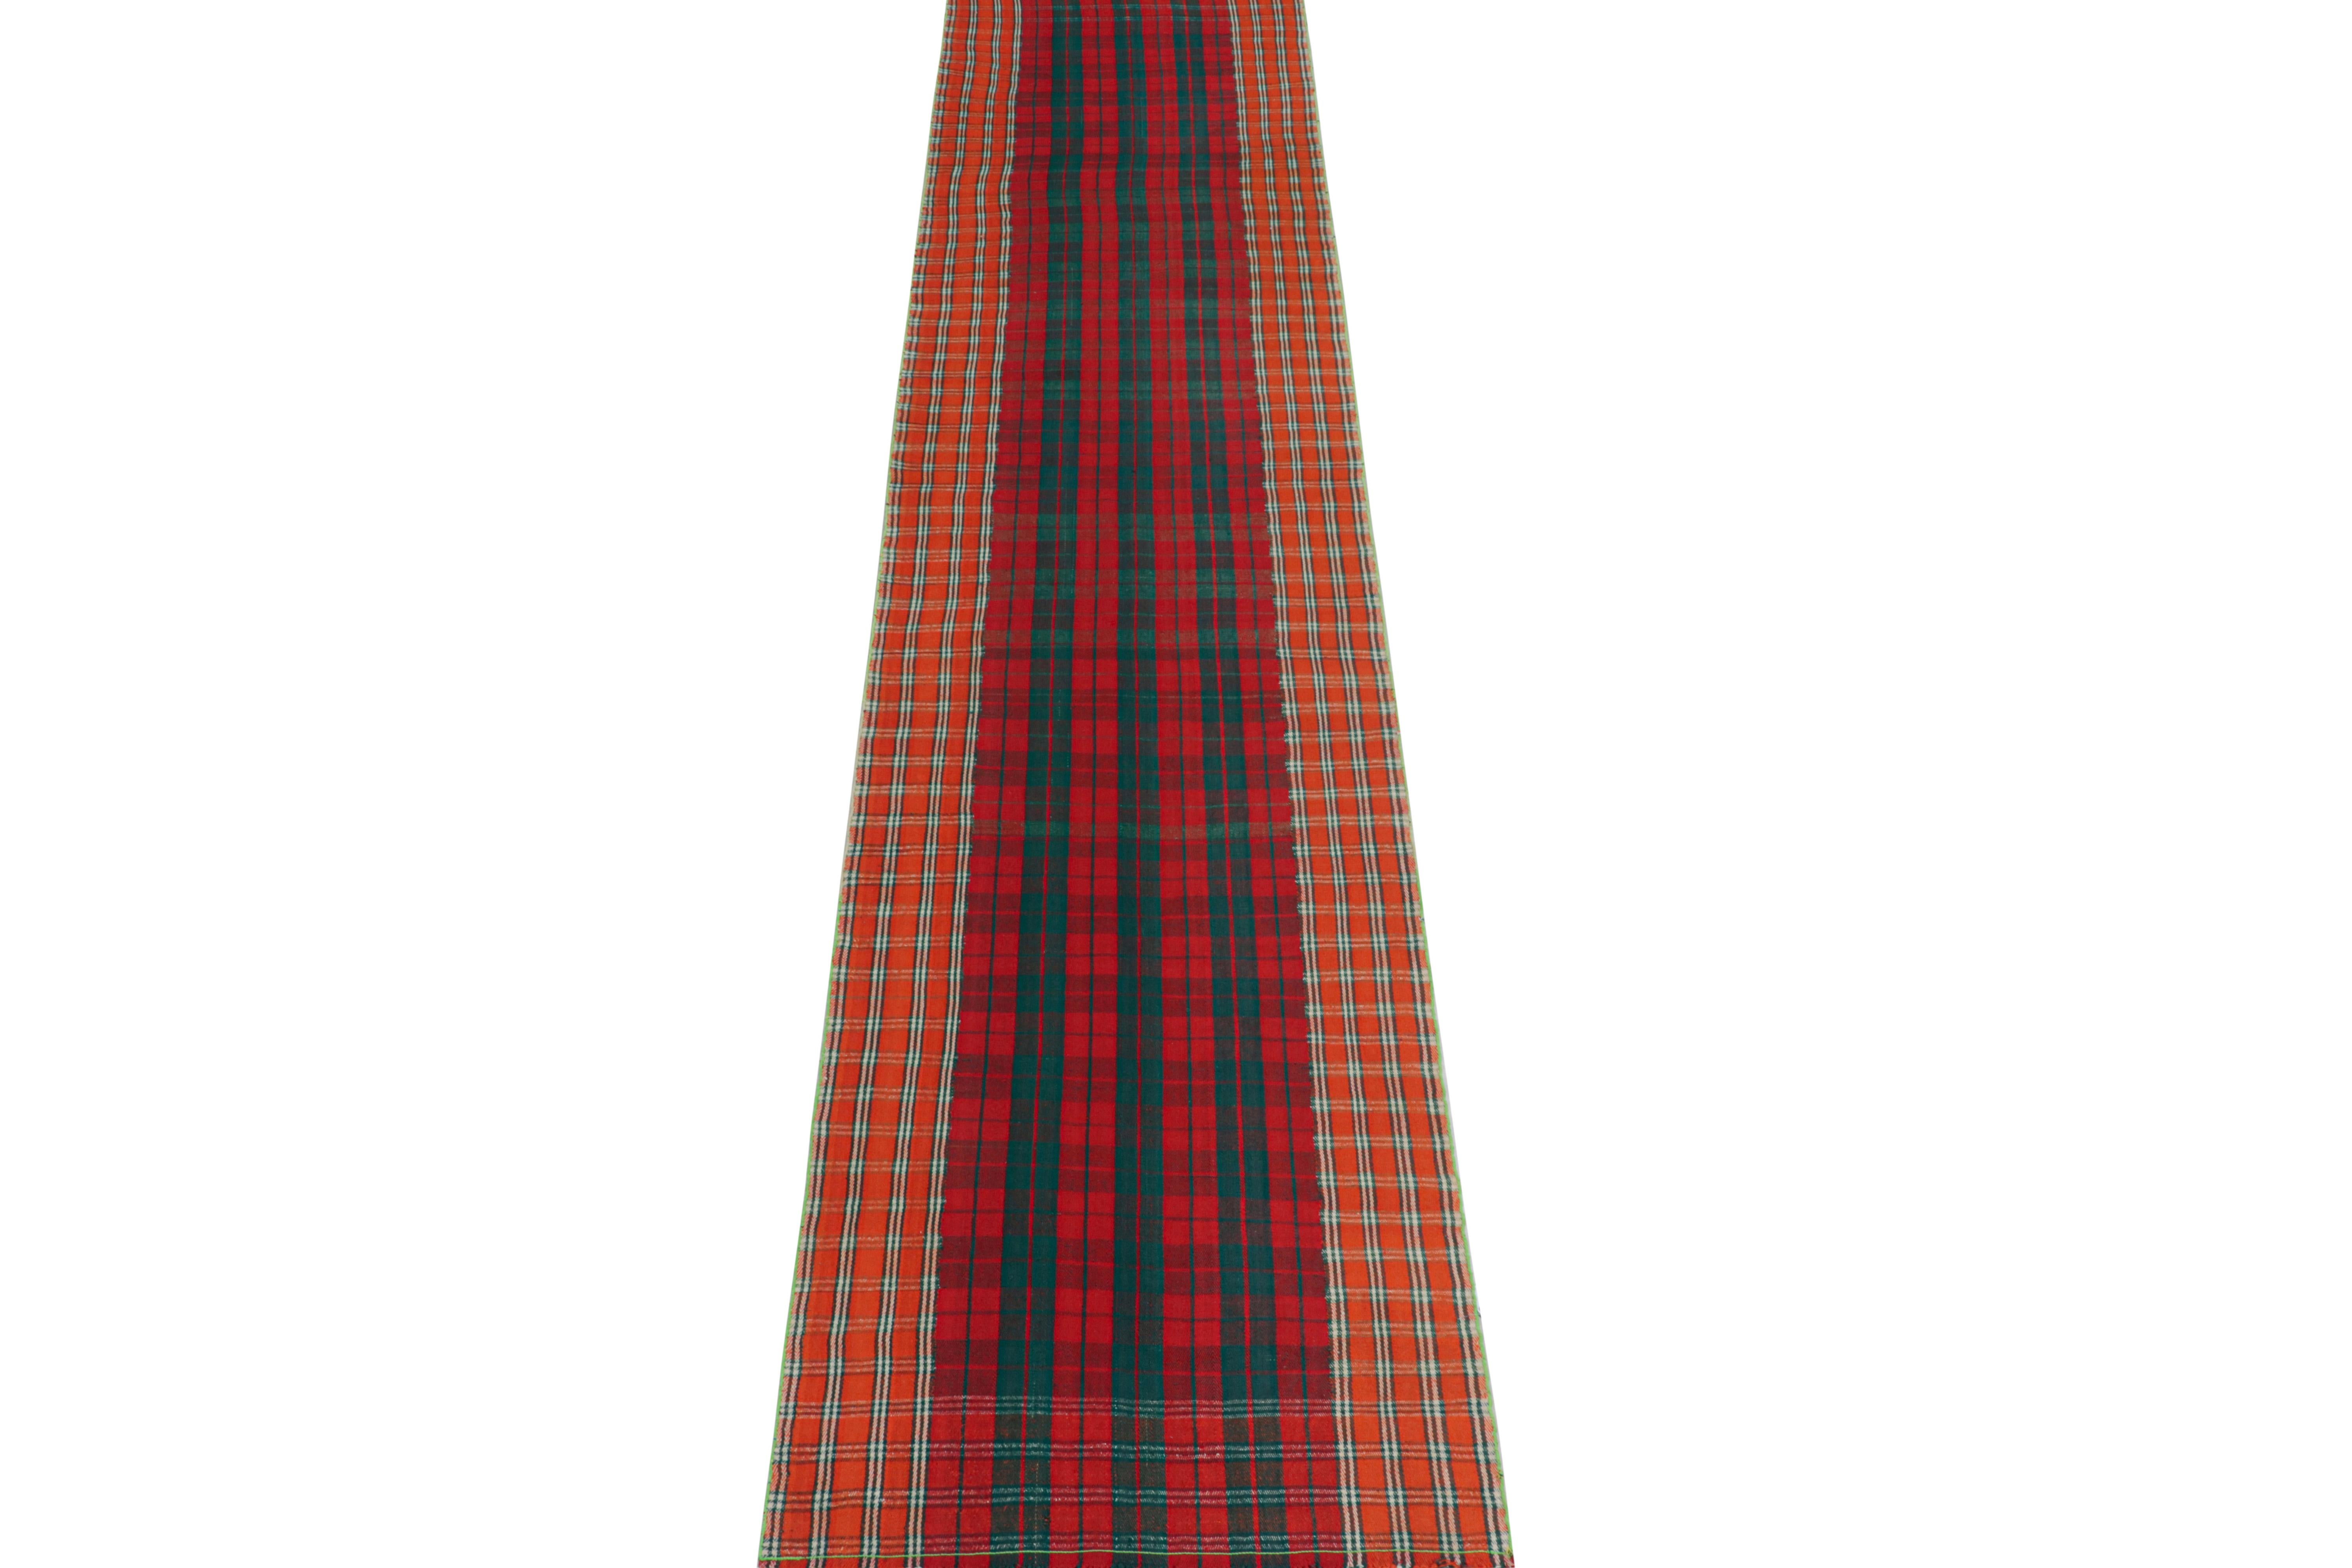 This vintage 3x15 Persian kilim is a rare extra-long runner from the Qashqai tribe, handwoven in wool circa 1950-1960.

Its technique is a mid-century Jajim Kilim style, in which tribal weavers would combine multiple narrow flat weaves together.